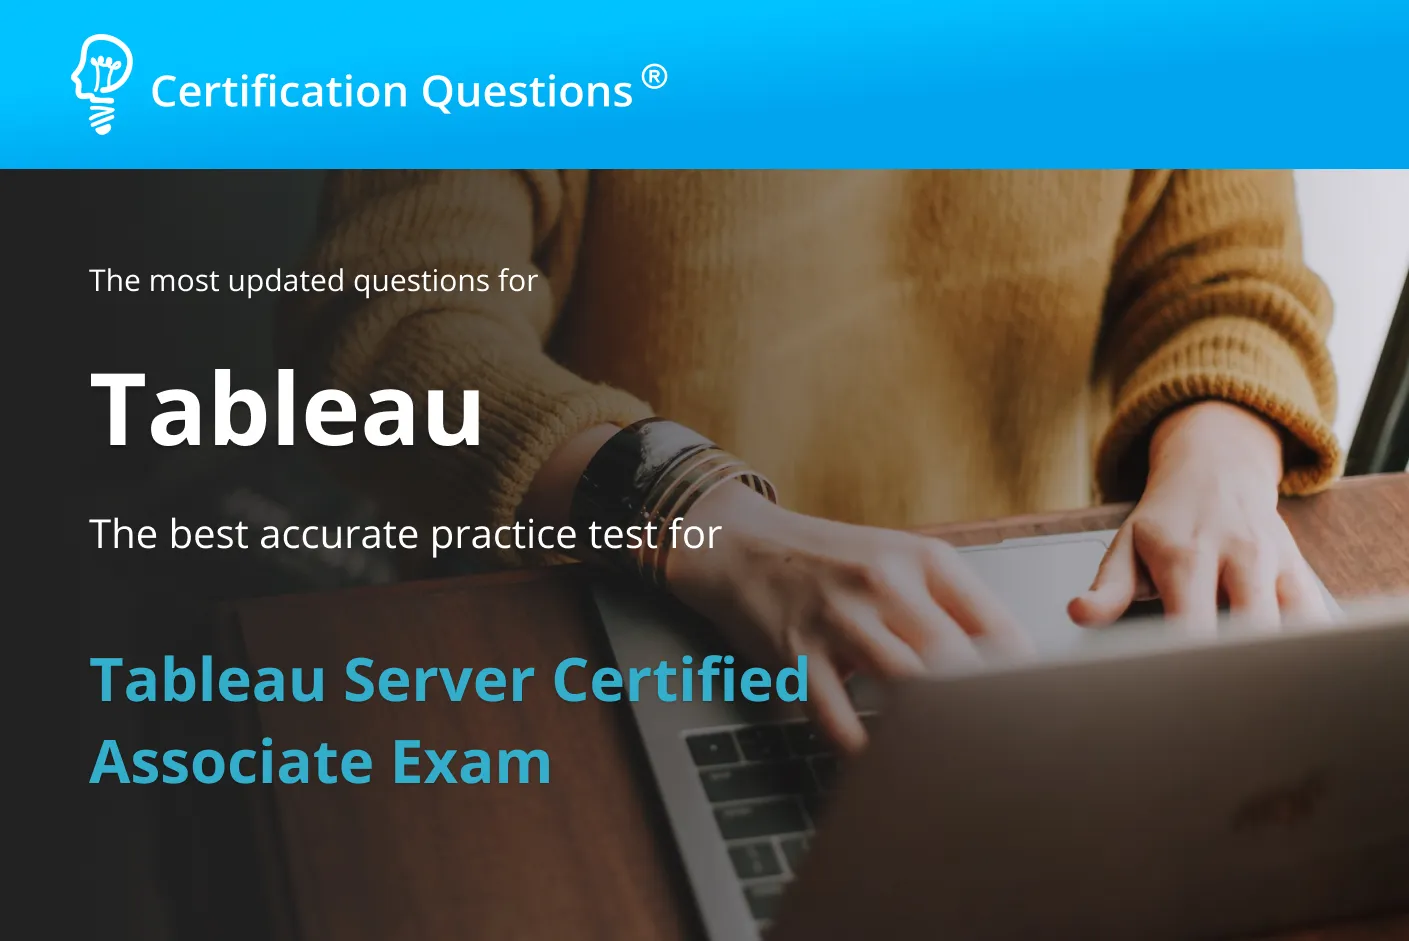 This image is related to the study guide of the tableau server certified associate exam prep.